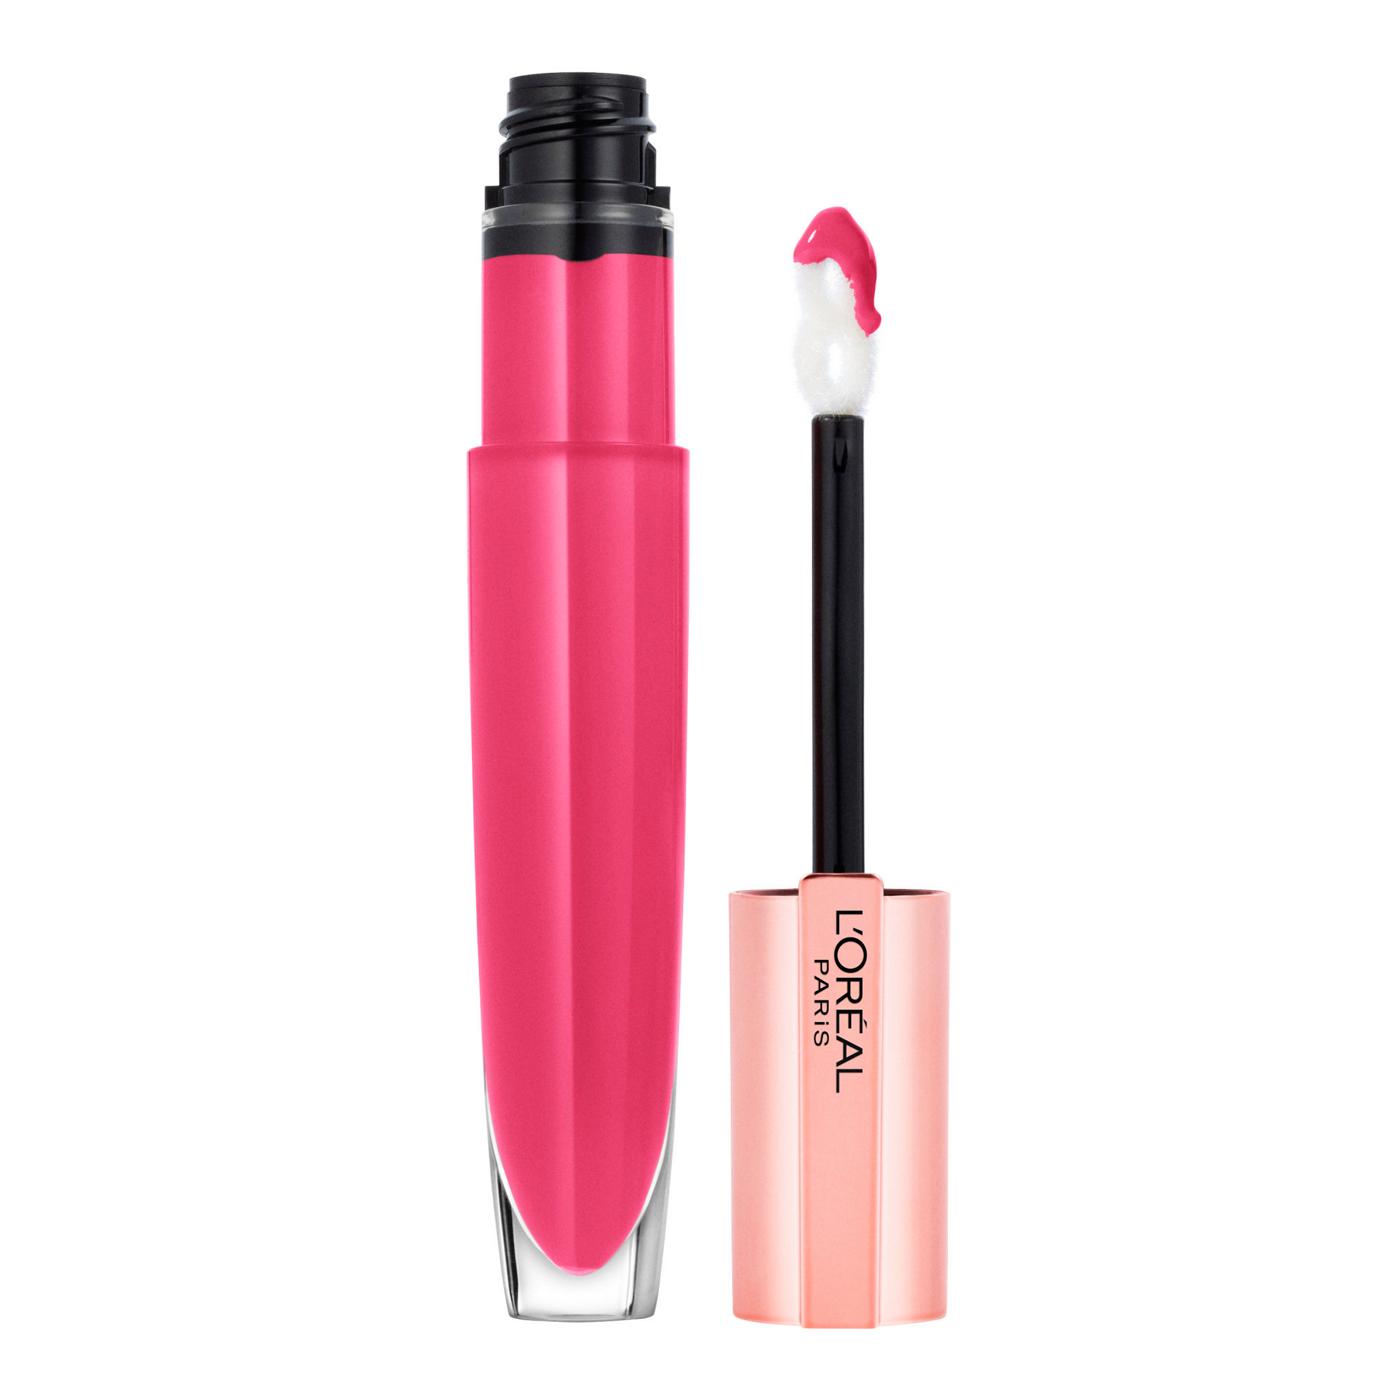 L'Oréal Paris Glow Paradise  Lip Balm-in-Gloss Pomegranate Extract Sublime Magenta; image 1 of 6